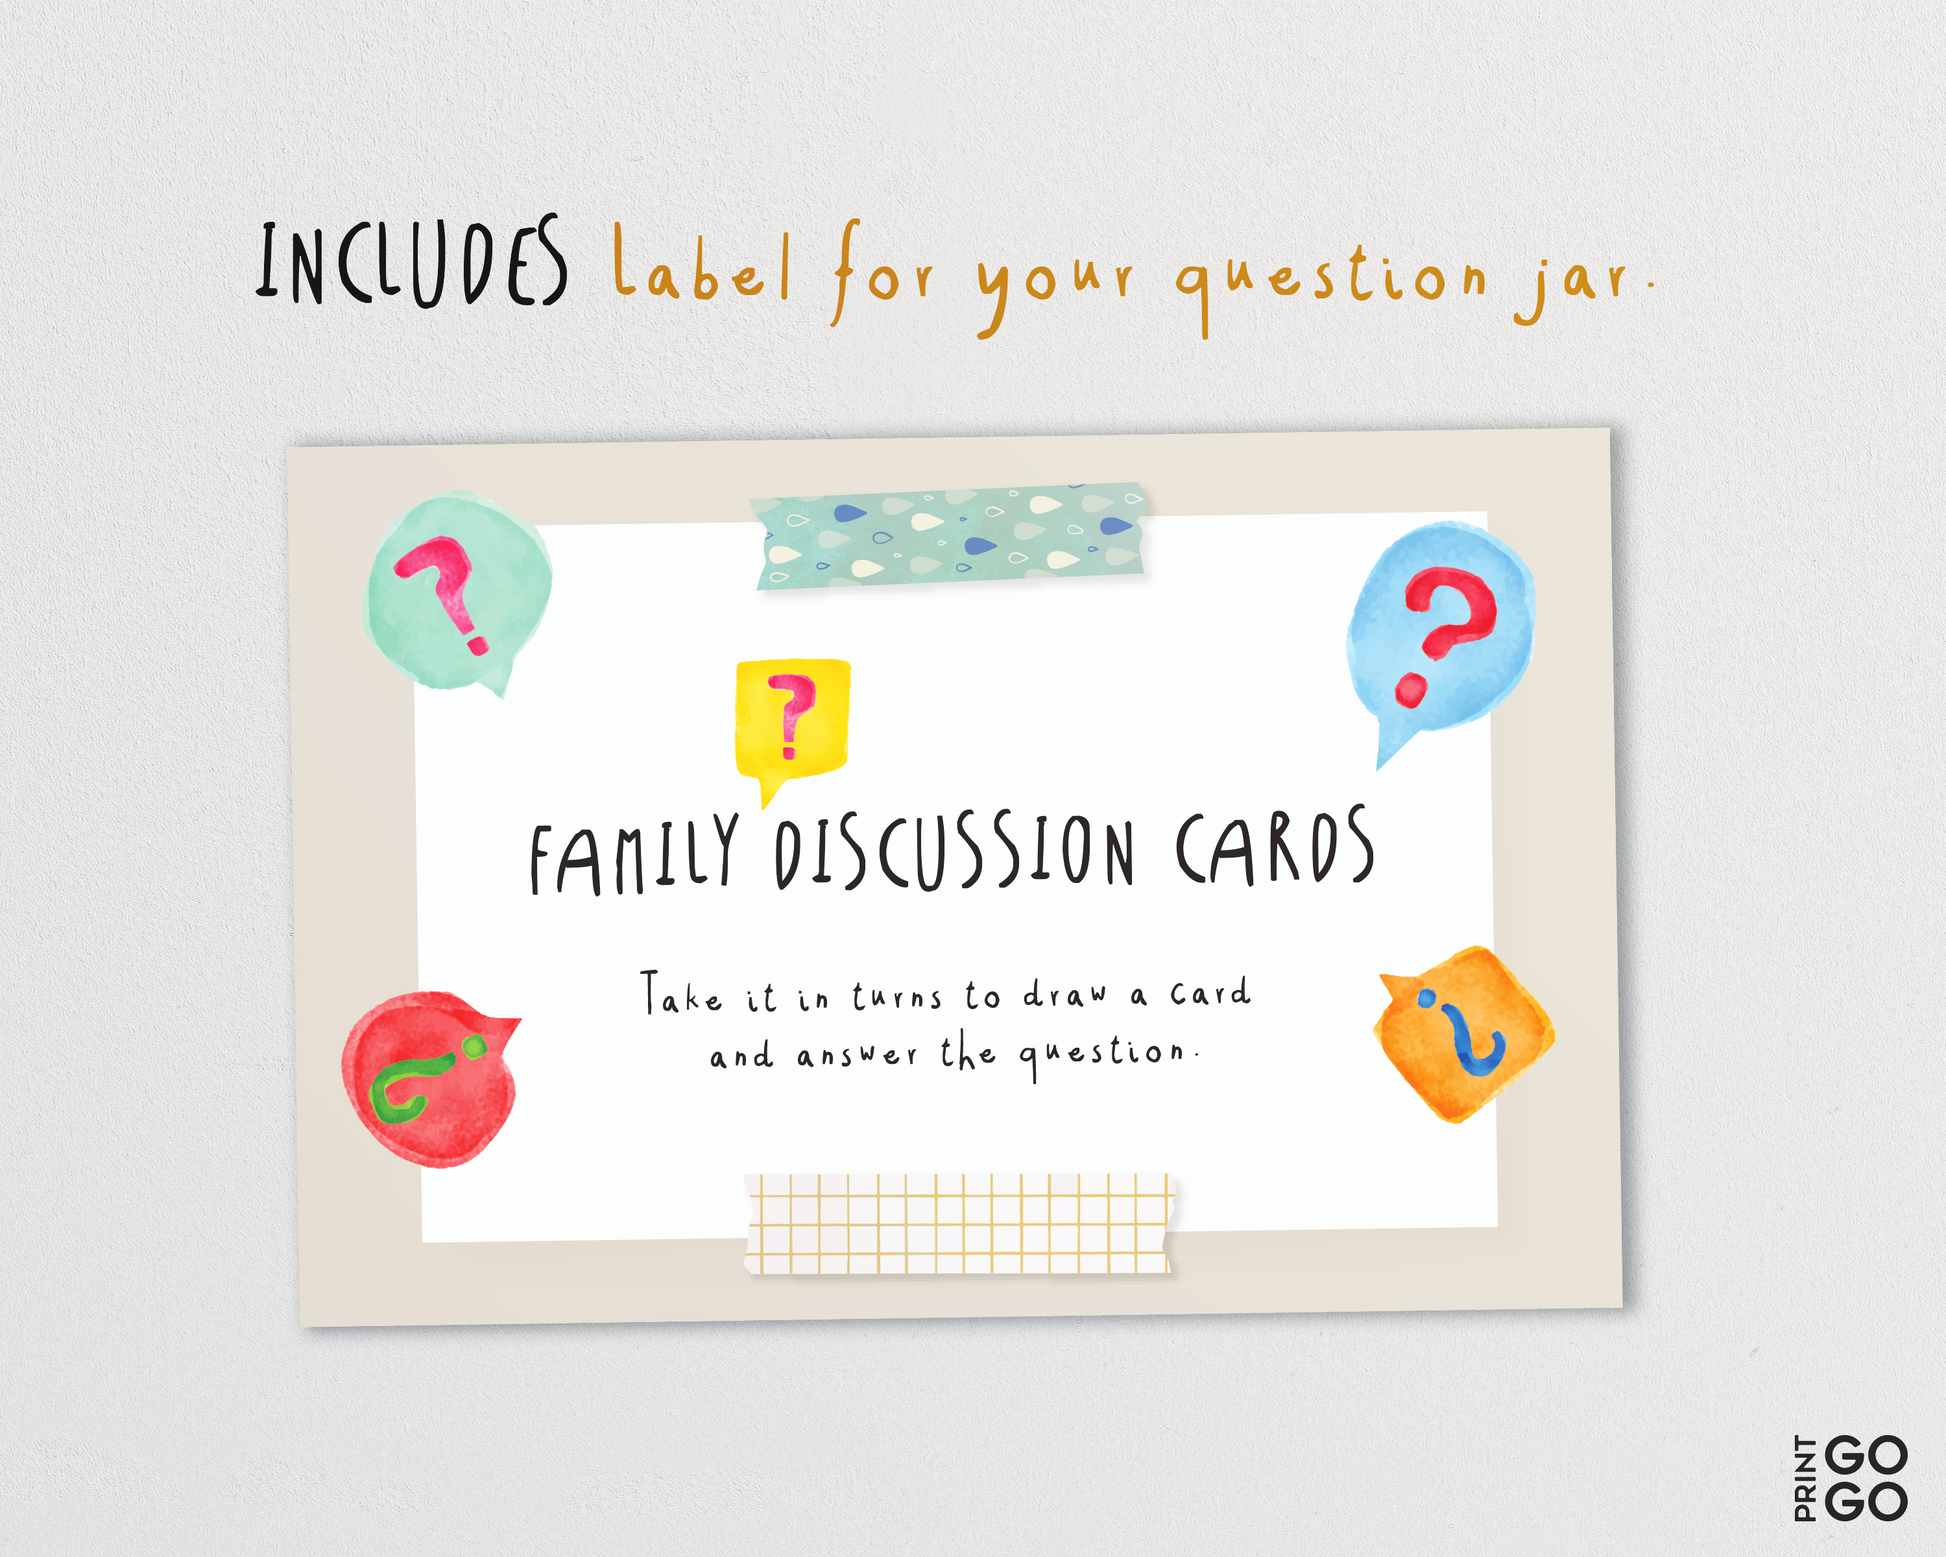 Family Discussion Cards - 96 Conversation Starters to Promote Meaningful Chat at the Dinner Table | Weekly Family Question Jar Idea